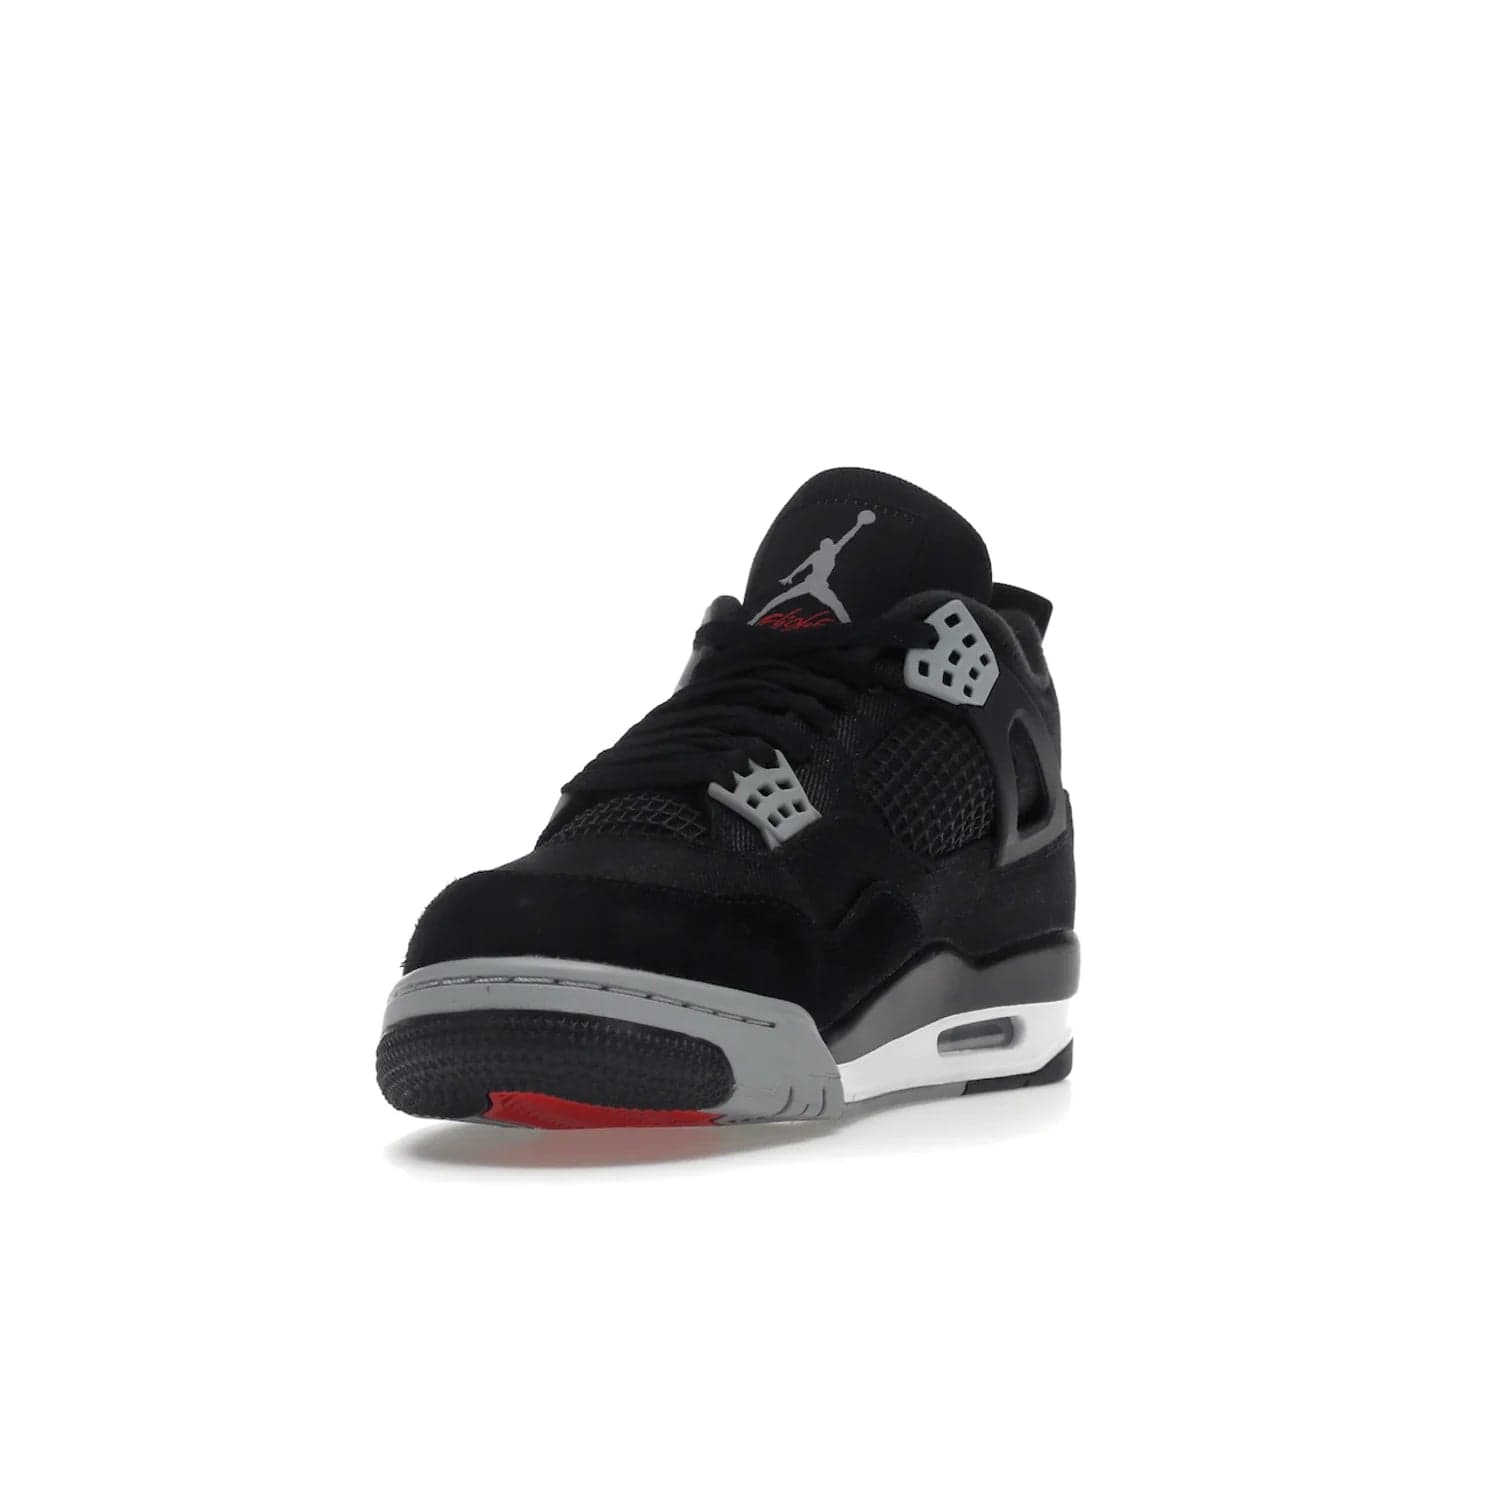 Jordan 4 Retro SE Black Canvas - Image 13 - Only at www.BallersClubKickz.com - The Air Jordan 4 Retro SE Black Canvas brings timeless style and modern luxury. Classic mid-top sneaker in black canvas and grey suede with tonal Jumpman logo, Flight logo and polyurethane midsole with visible Air-sole cushioning. Refresh your sneaker collection and rock the Air Jordan 4 Retro SE Black Canvas.